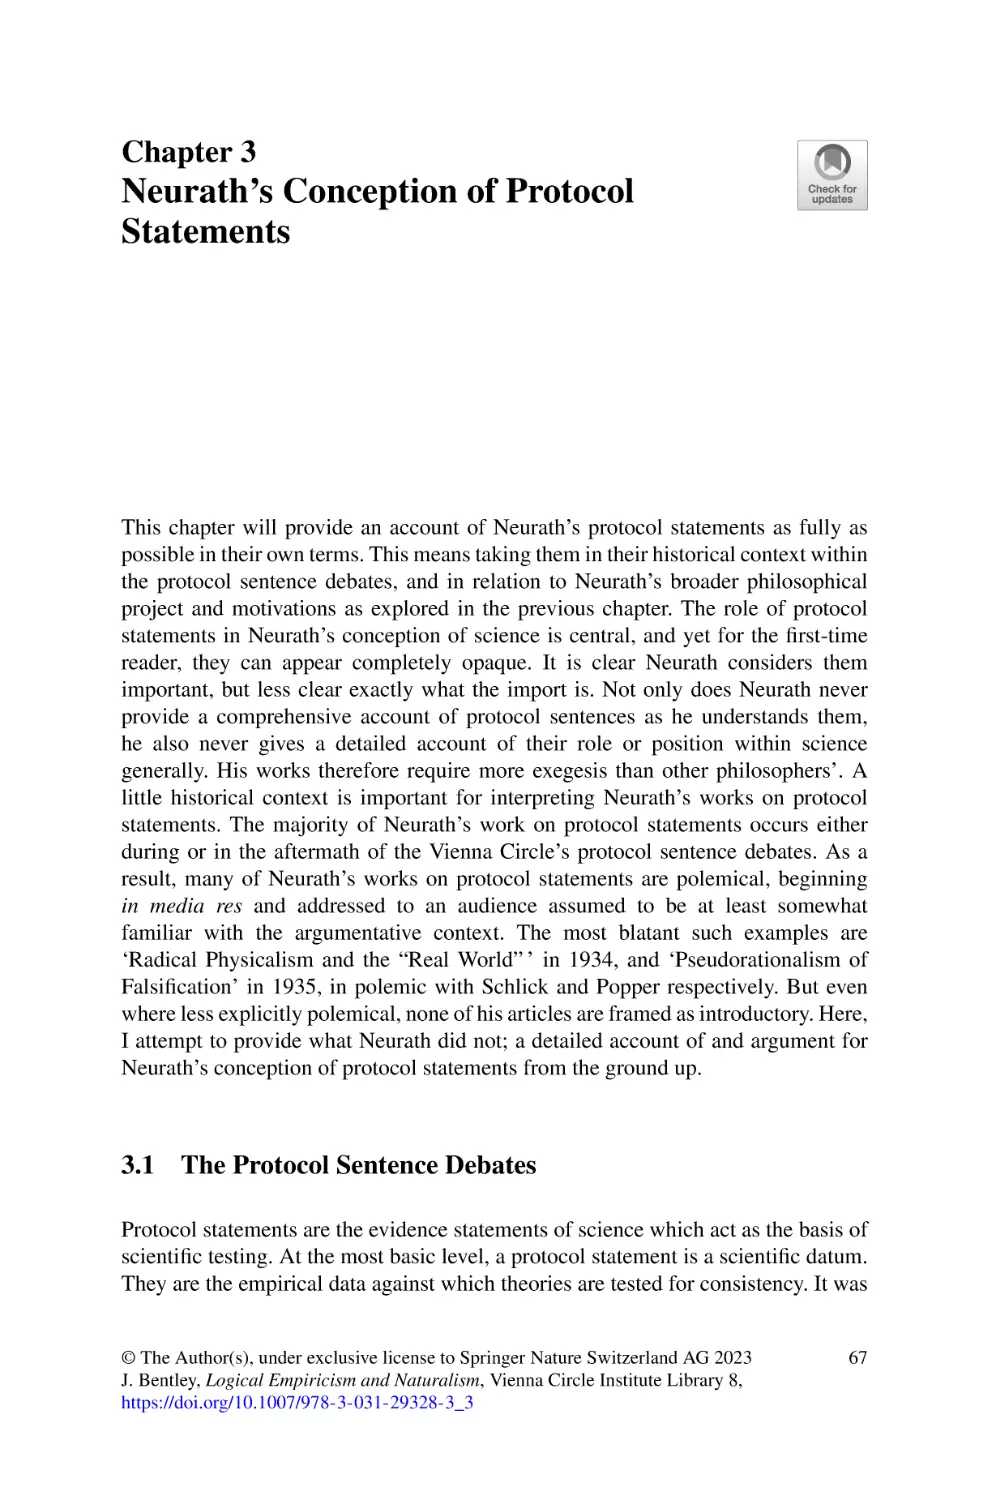 3 Neurath's Conception of Protocol Statements
3.1 The Protocol Sentence Debates